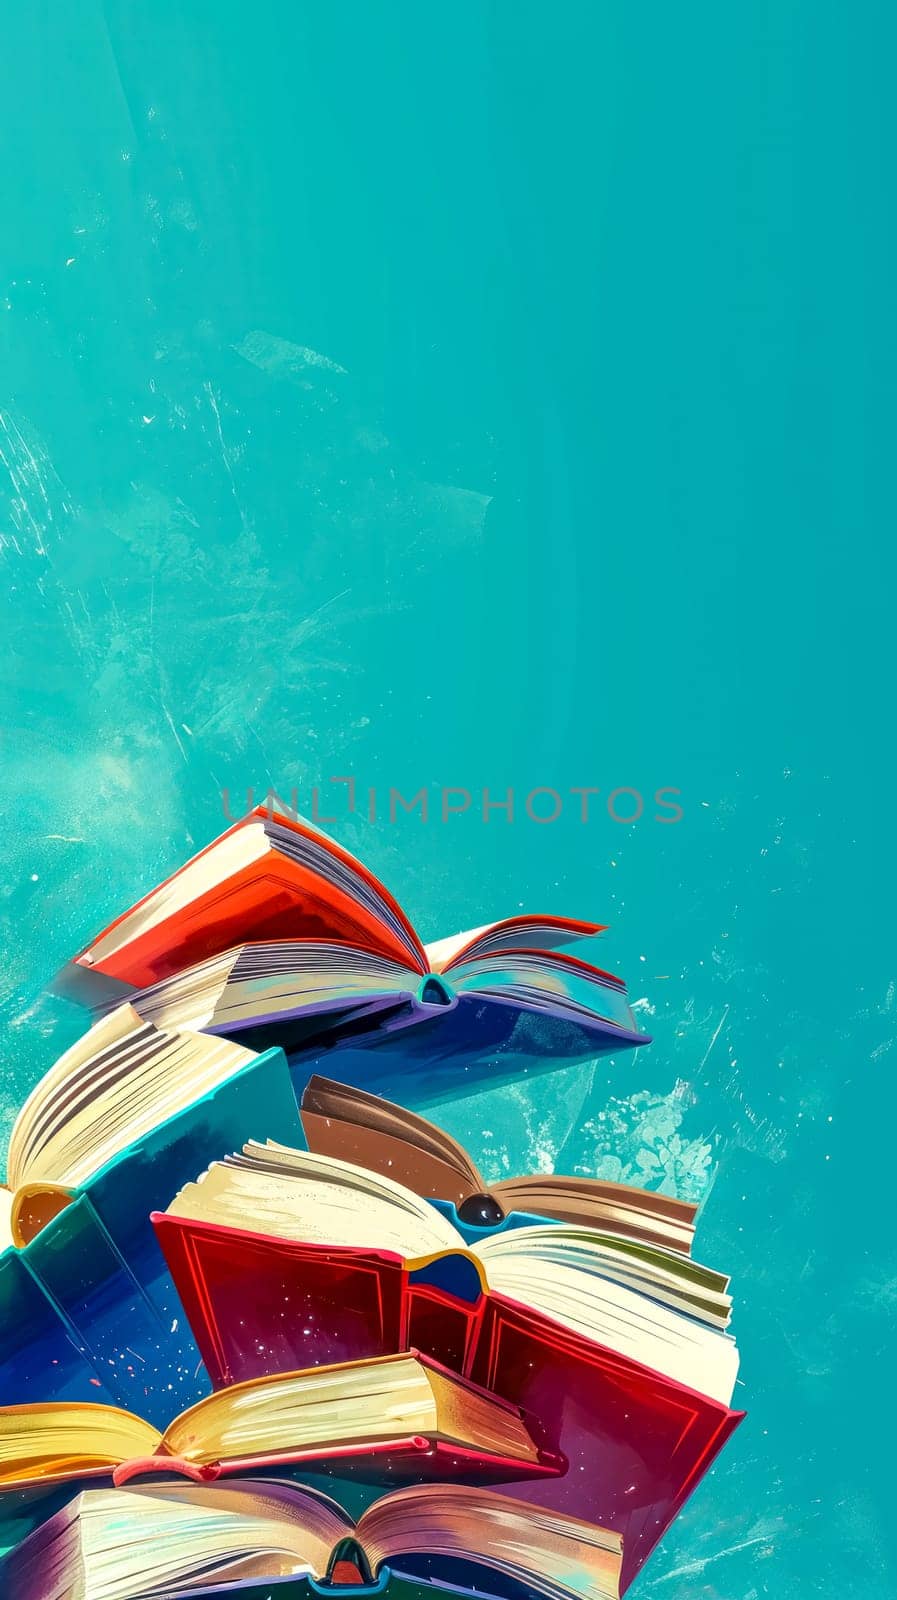 colorful array of open books with pages fanned out, set against a vibrant turquoise backdrop, suggesting a world of imagination and knowledge by Edophoto